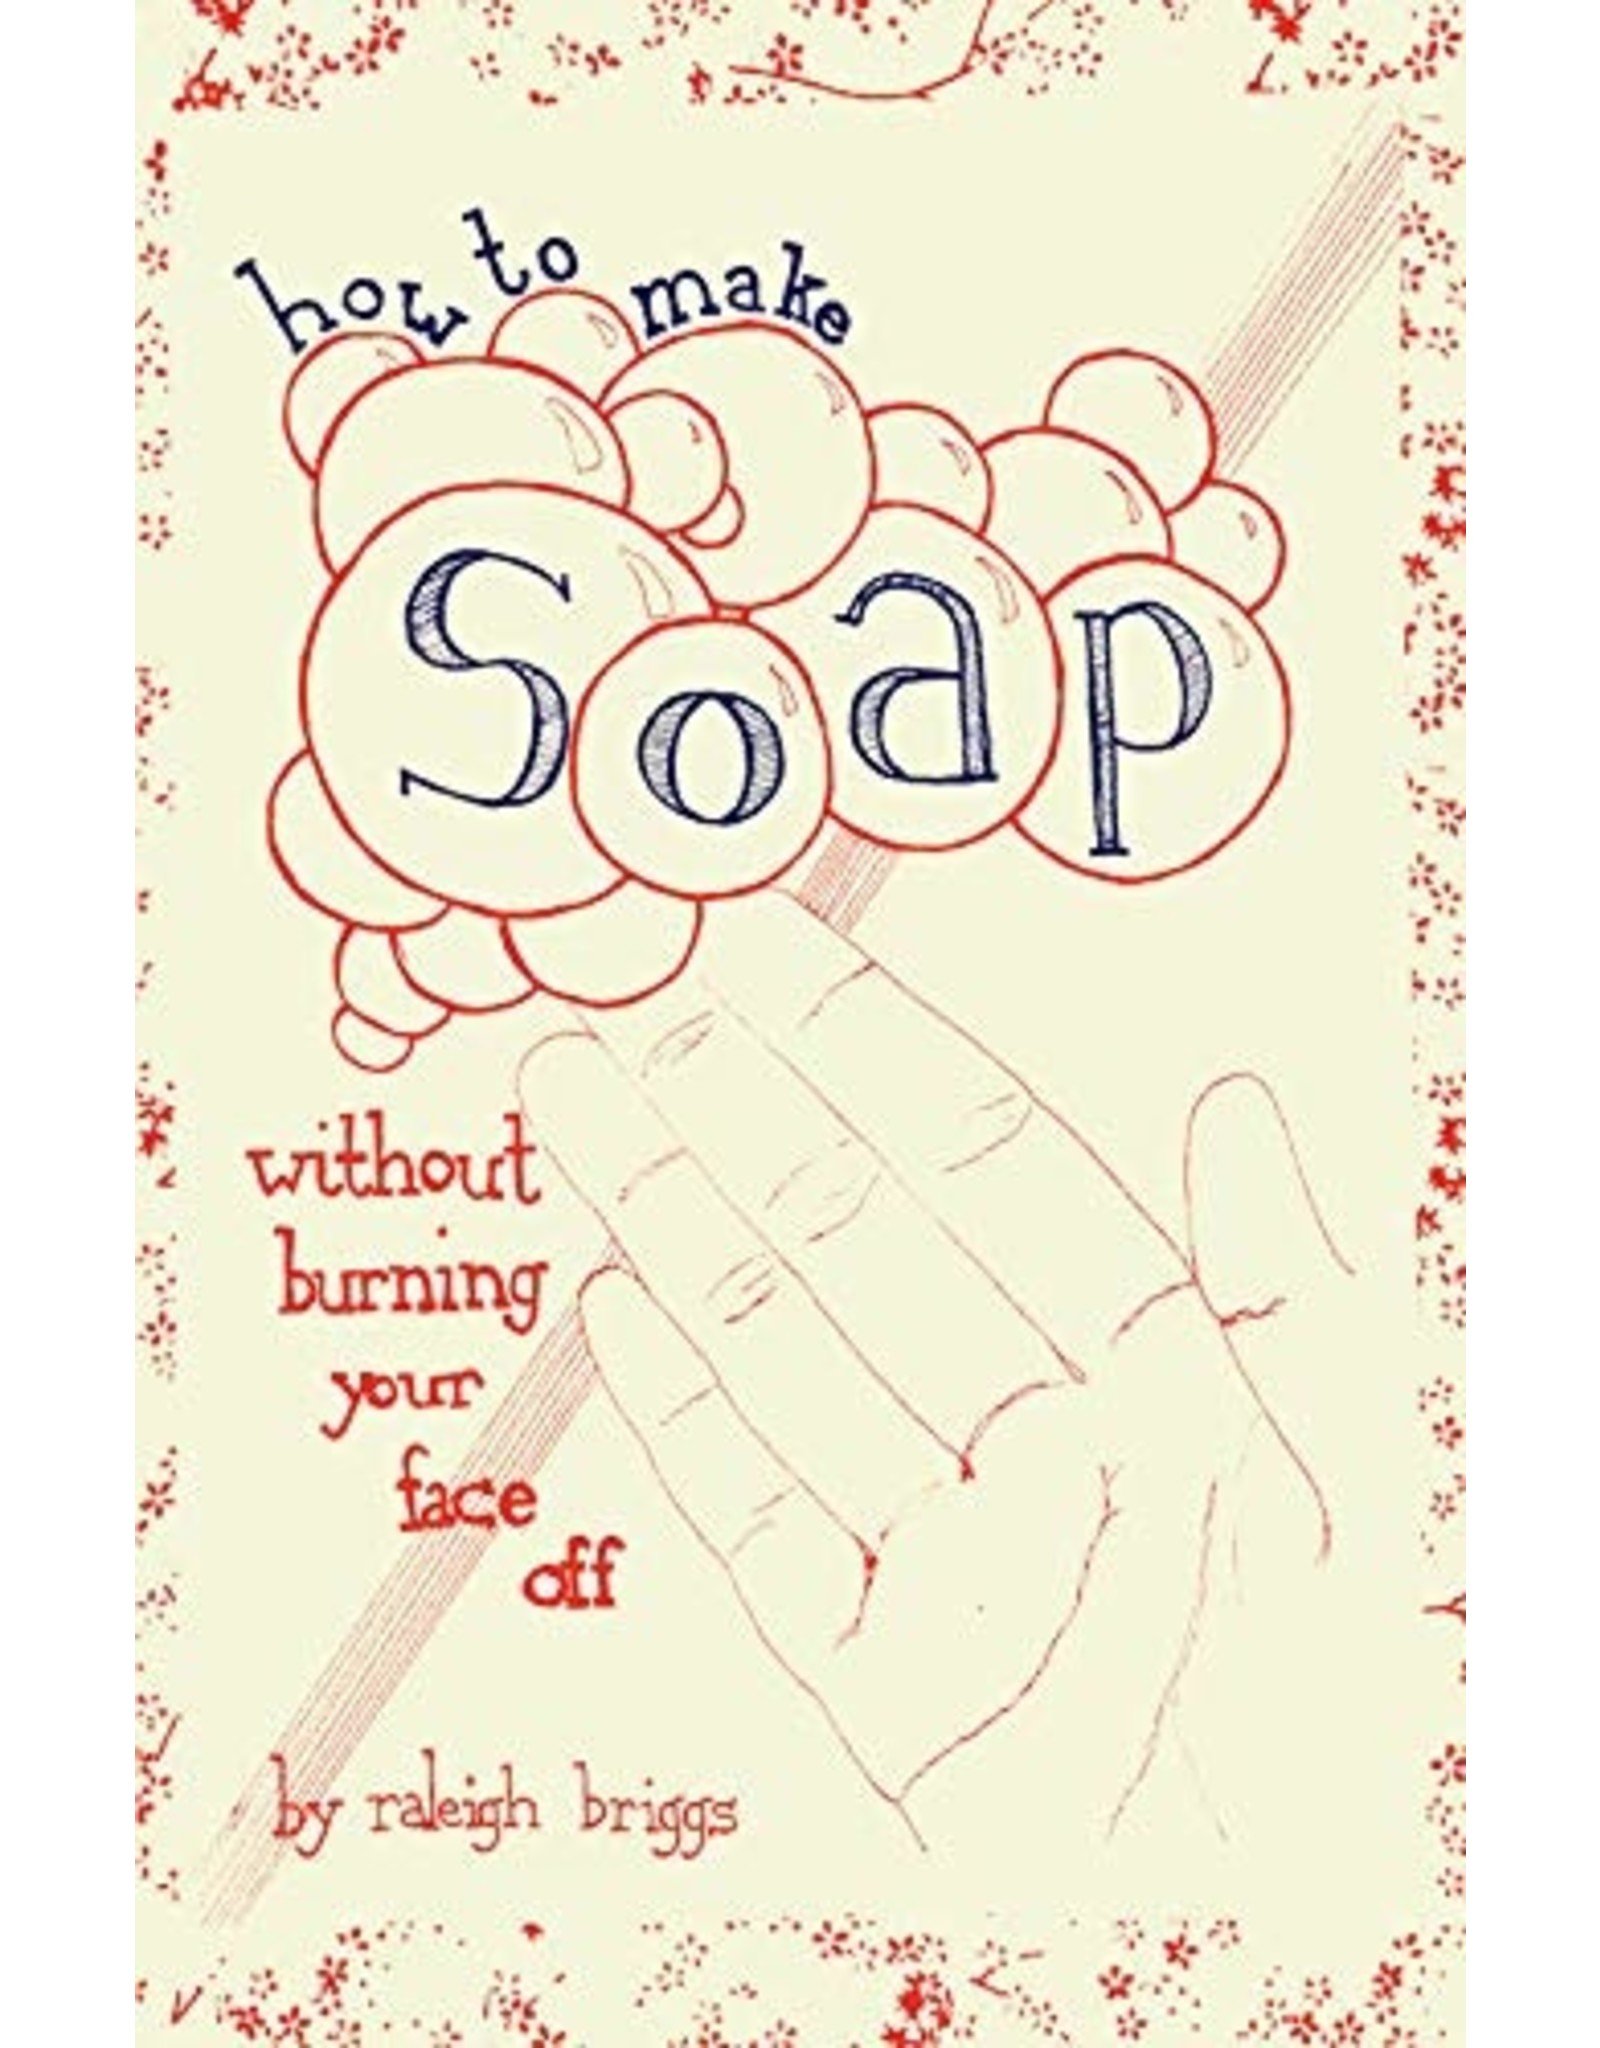 Literature How to Make Soap - Without Burning Your Face Off!